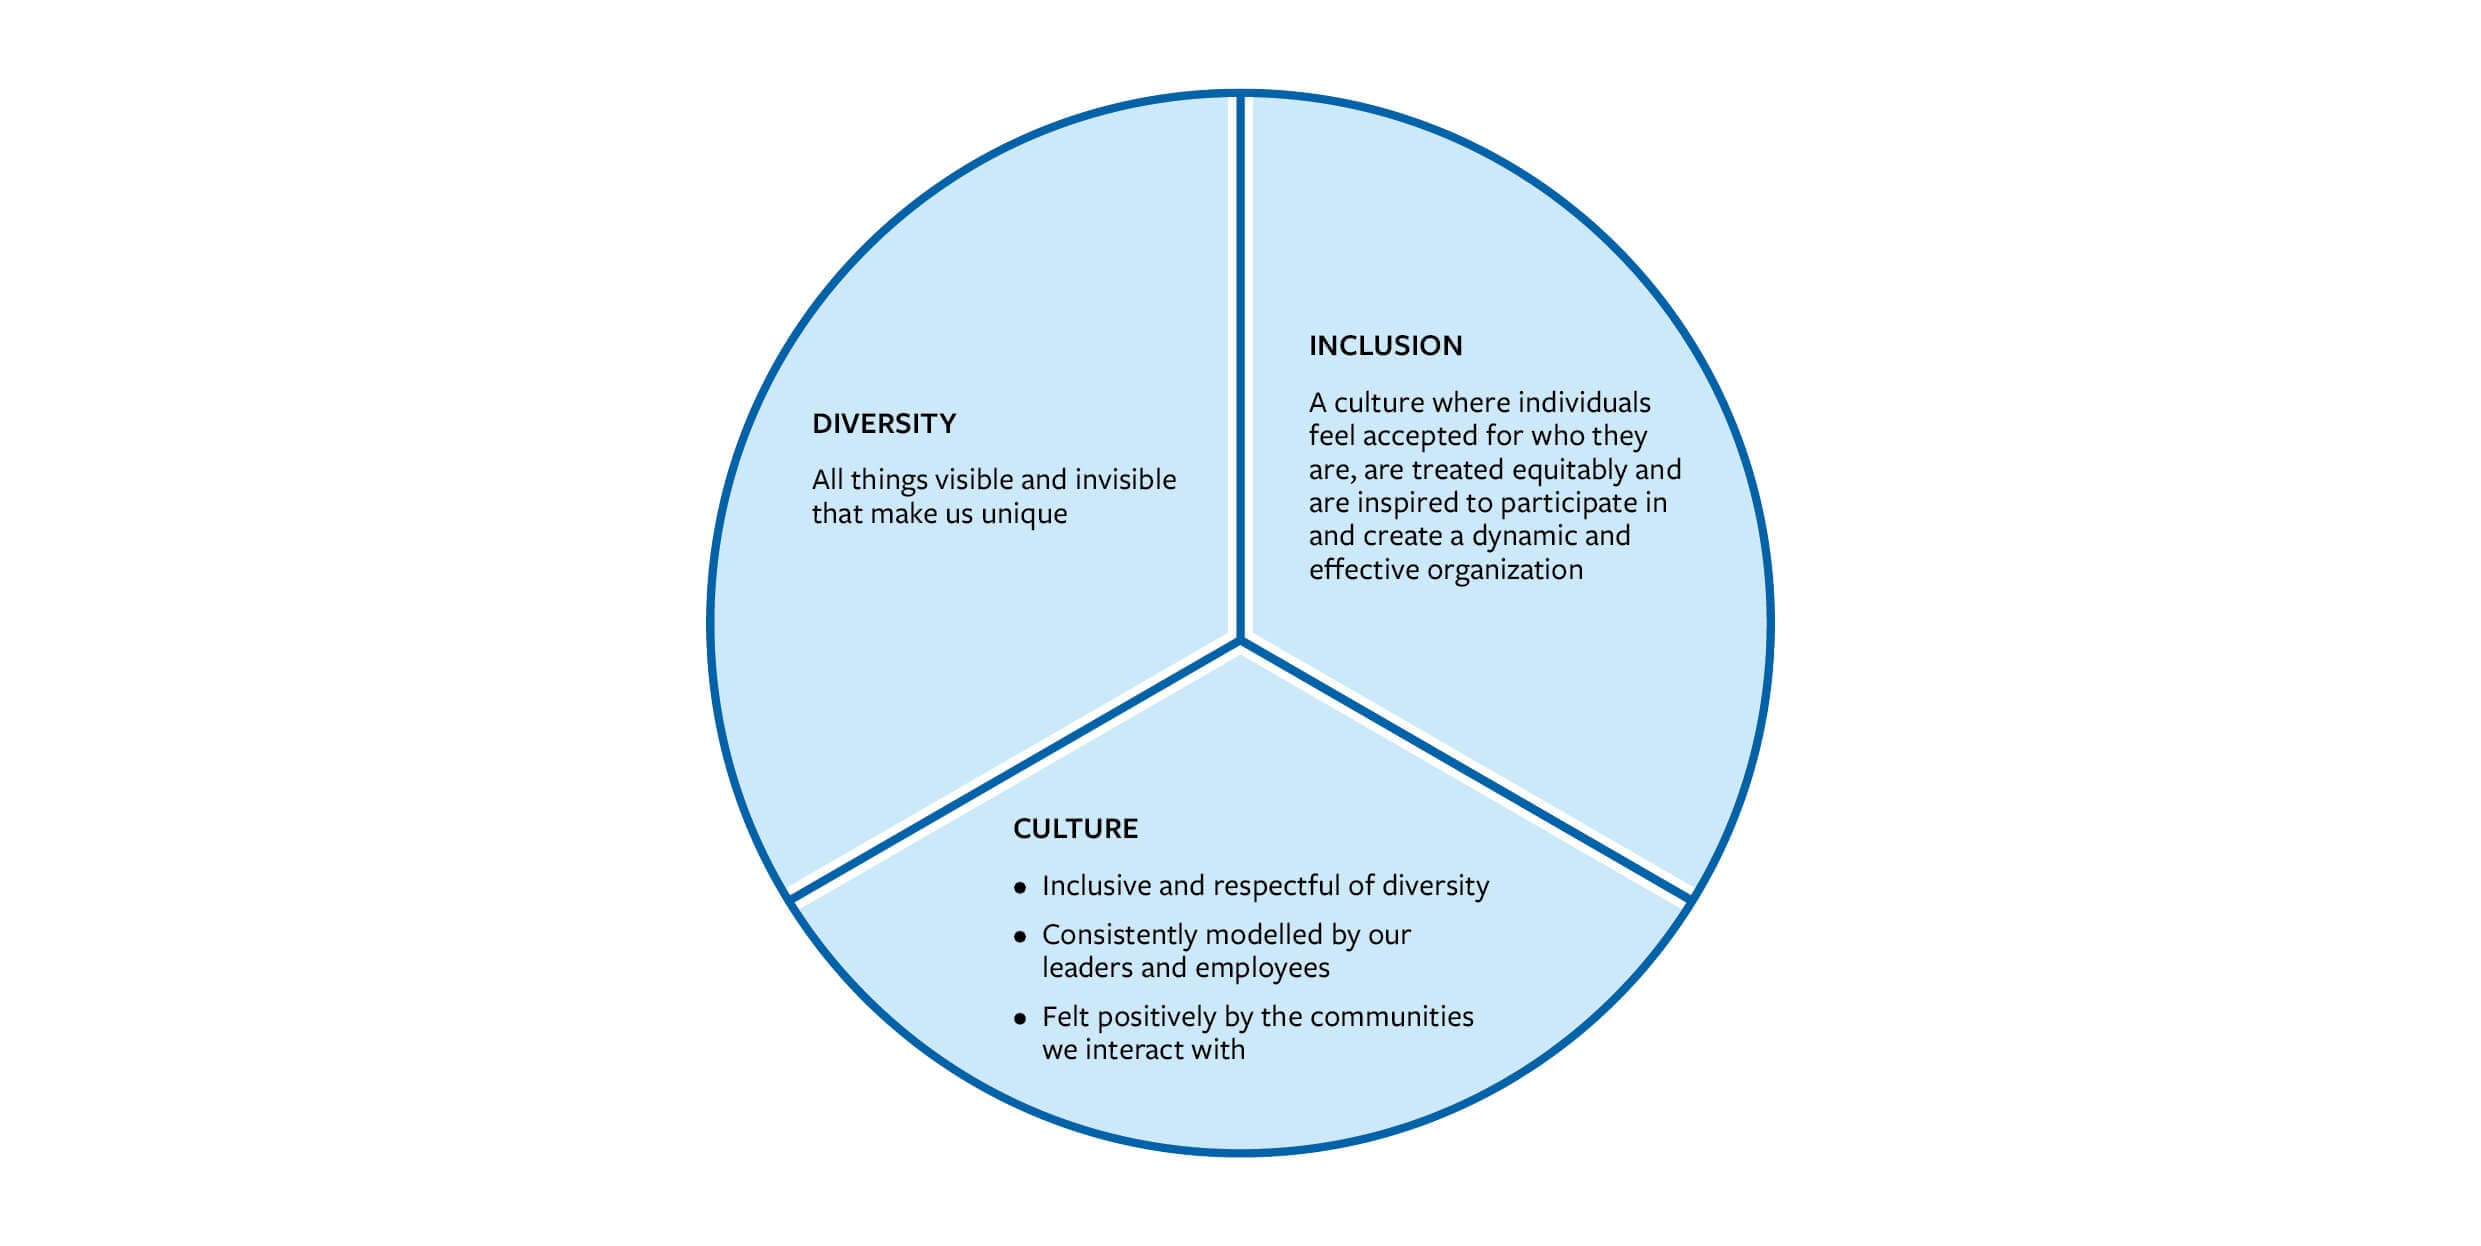 A circle diagram showing Sherritt's equal, three-way approach to diversity and inclusion: Diversity – All things visible and invisible that make us unique; Inclusion –  A culture where individuals feel accepted for who they are, are treated equitably and are inspired to participate in and create a dynamic and effective organization; Culture – 1.) Inclusive and respectful of diversity, 2.) Consistently modelled by our leaders and employees, 3.) Felt positively by the communities we interact with